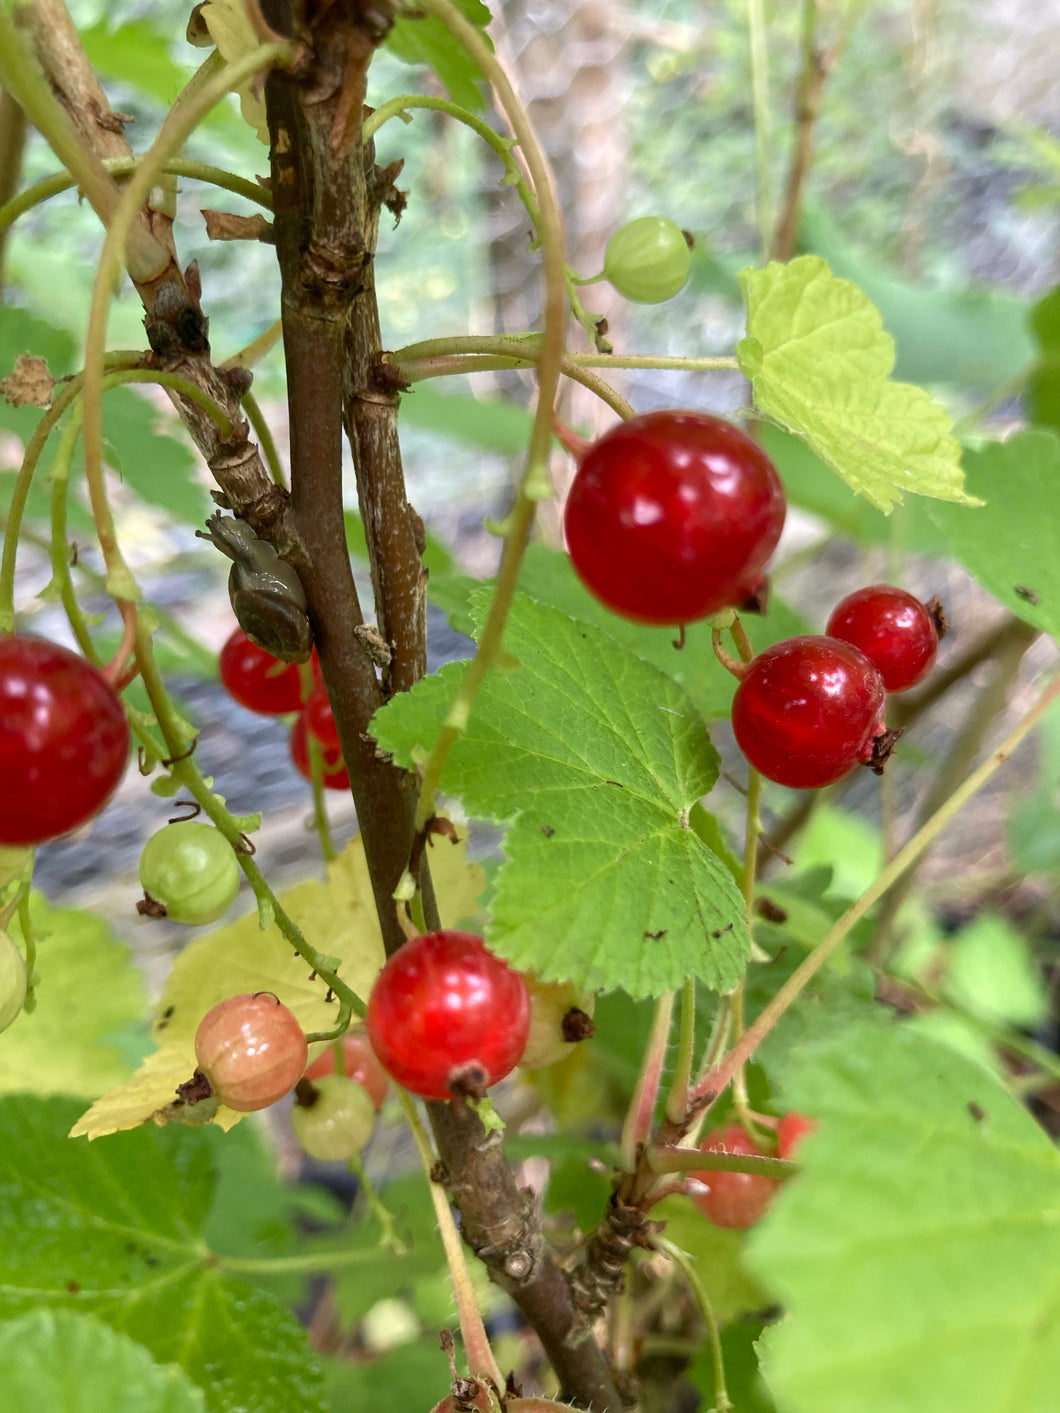 3 plugs/young transplants of Redcurrant for Grow-Your-Own Includes Postage